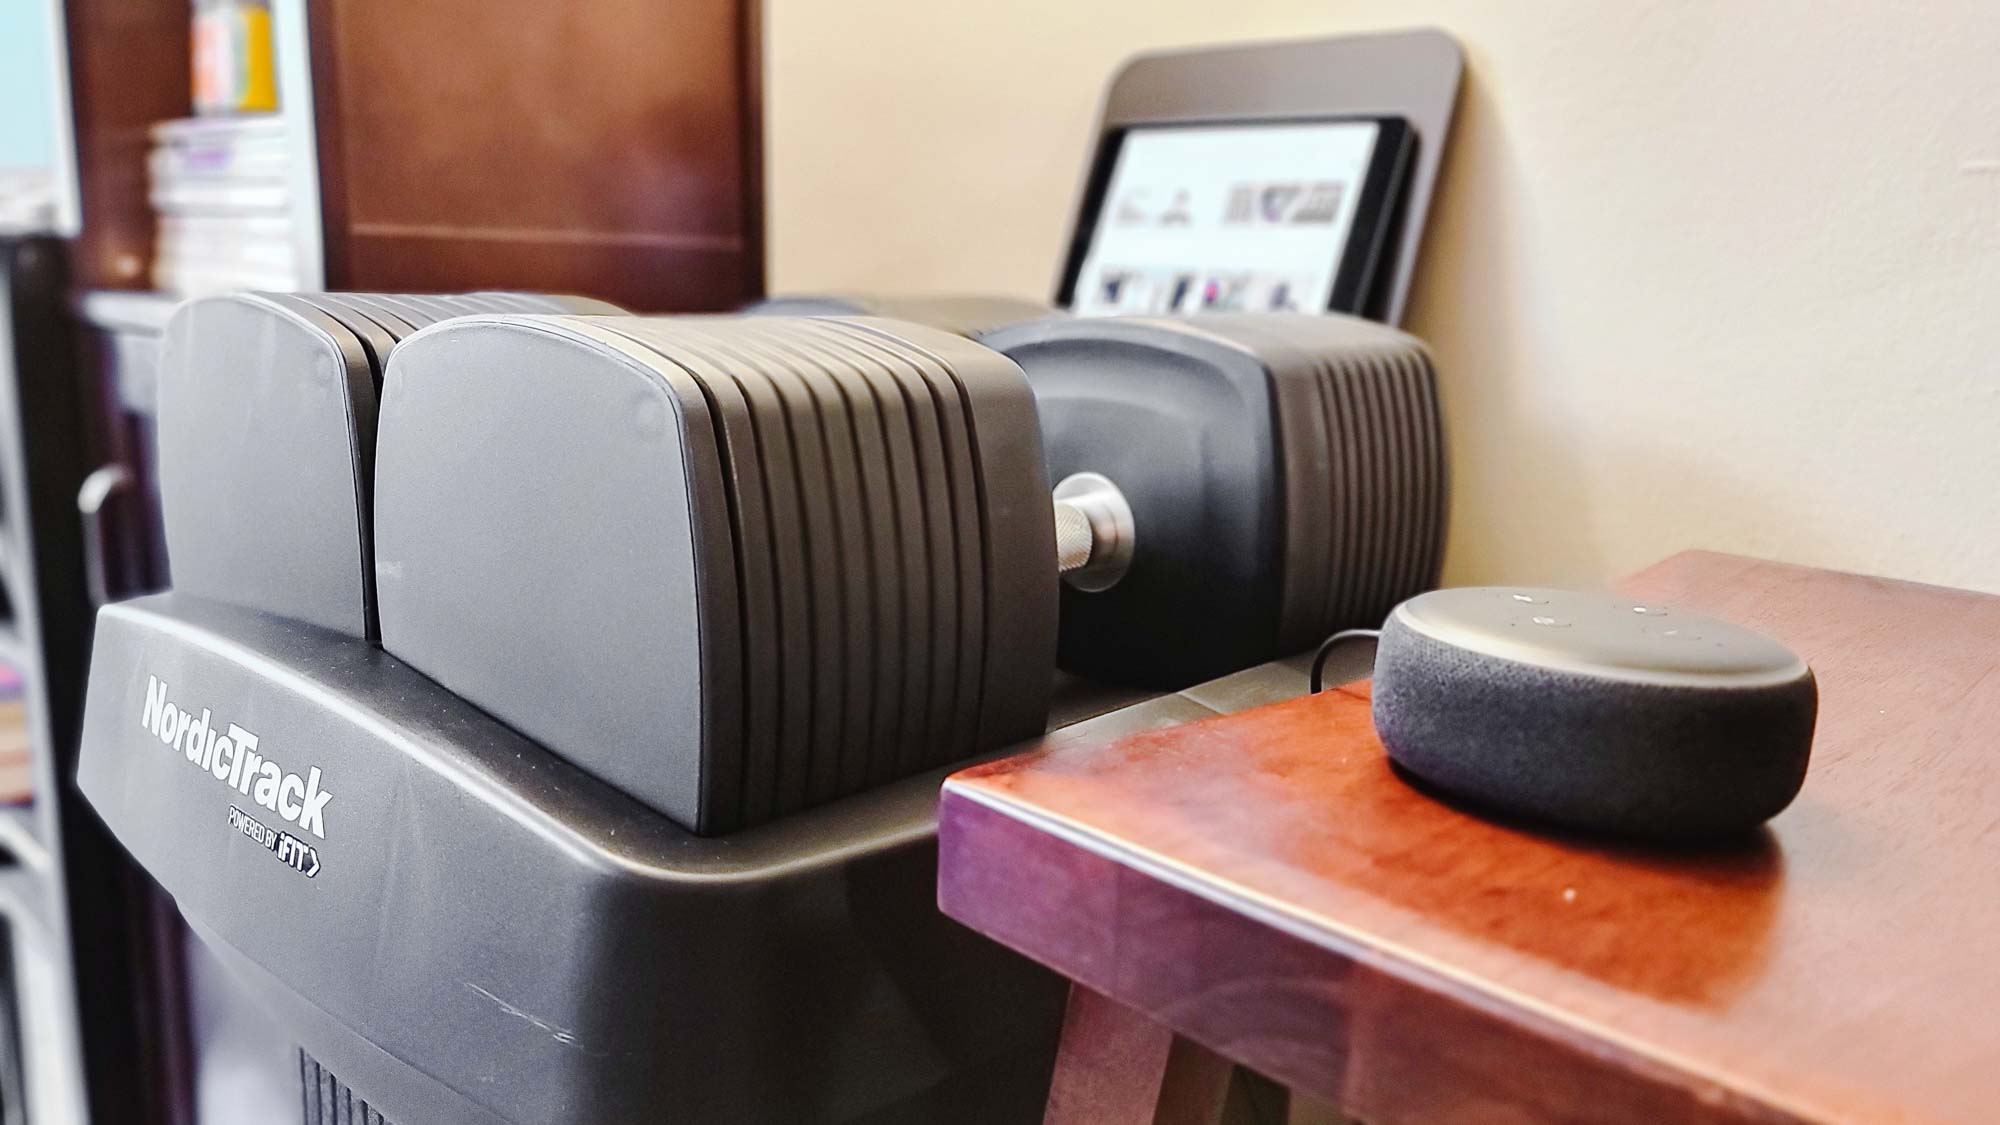 NordicTrack iSelect Voice-Controlled Dumbbells in stand